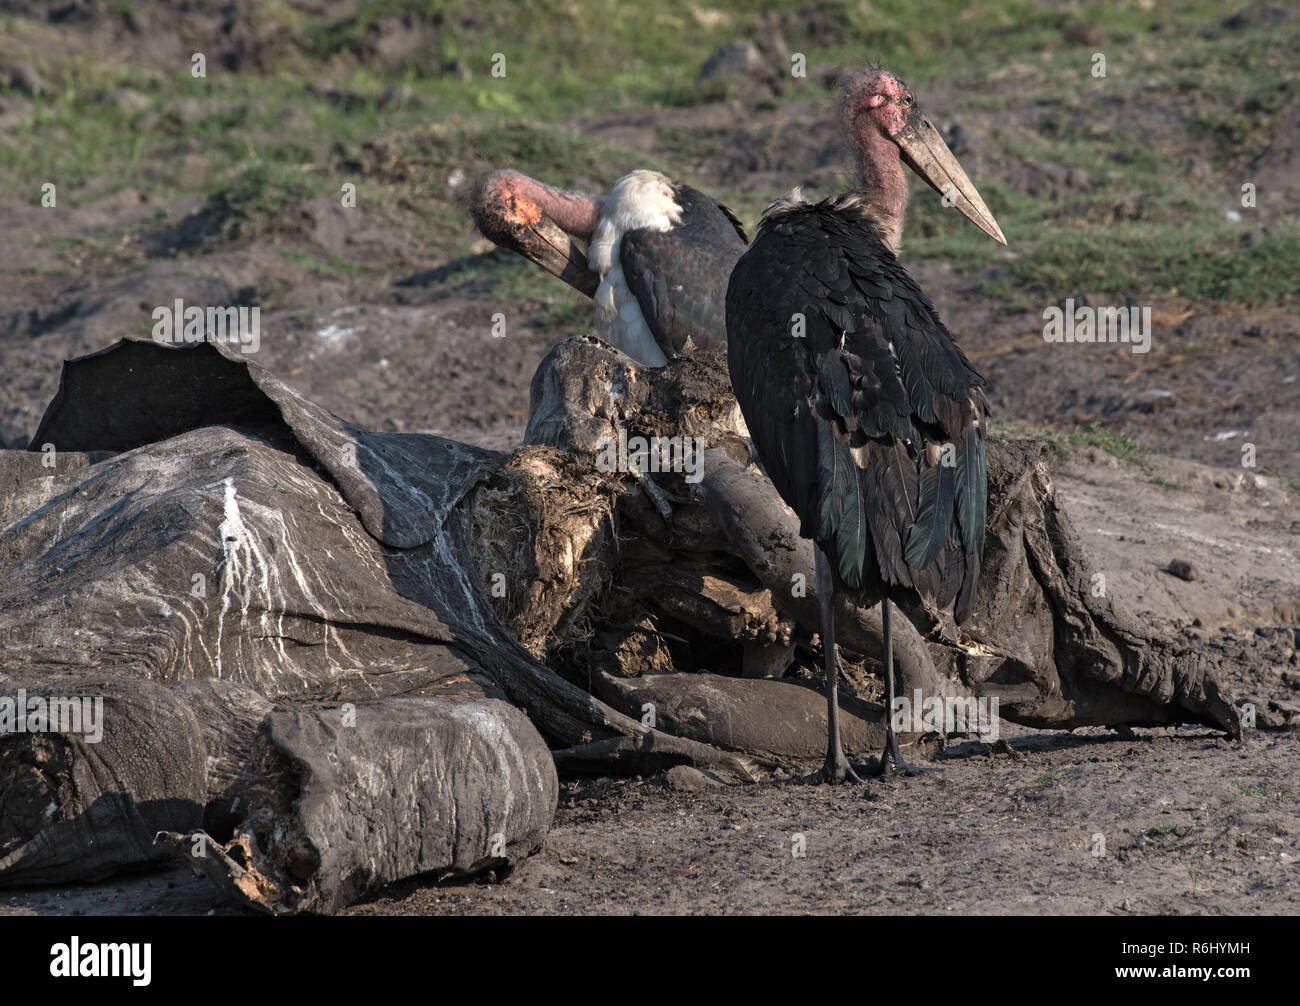 Marabou storks eat the carcass of a dead elephant, Moremi Game Reserve, Botswana Stock Photo